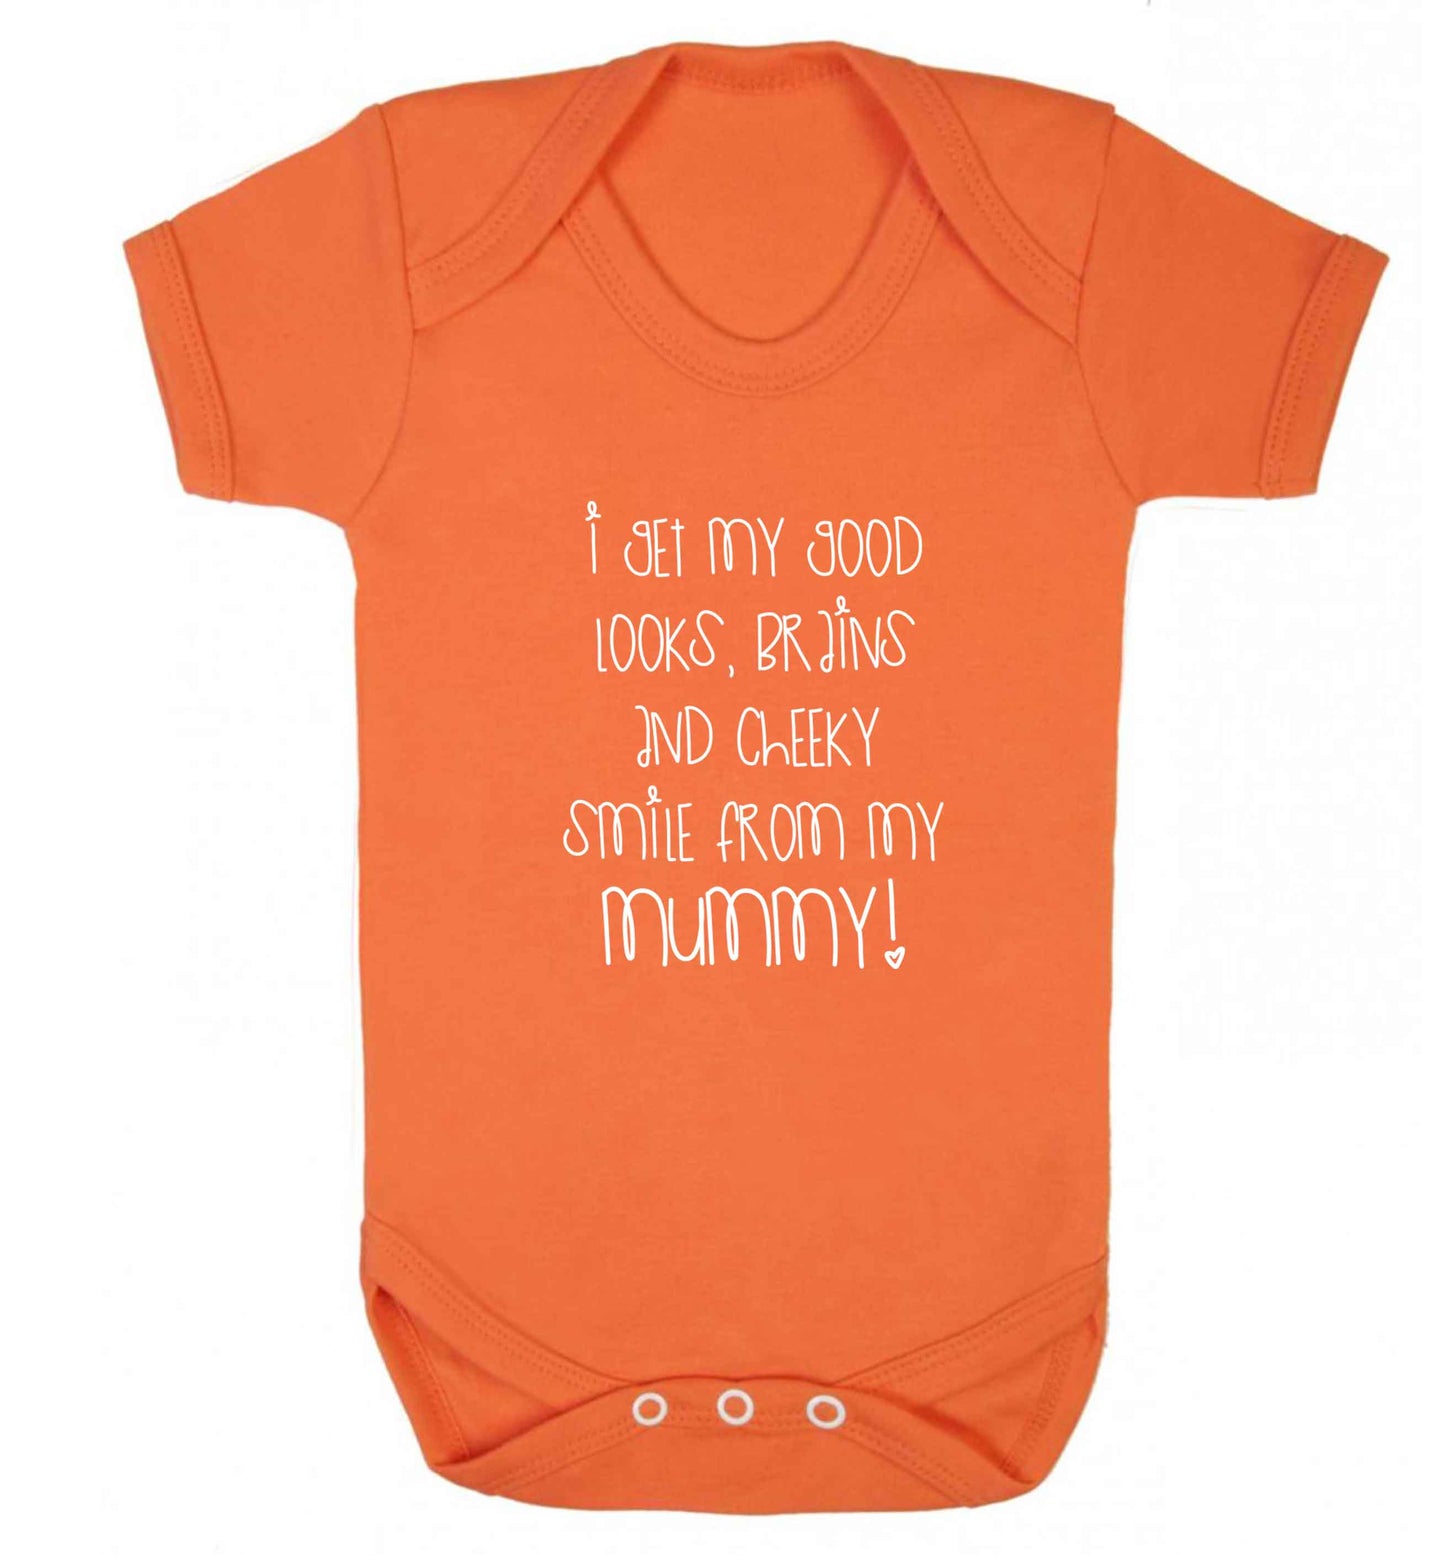 I get my good looks, brains and cheeky smile from my mummy baby vest orange 18-24 months